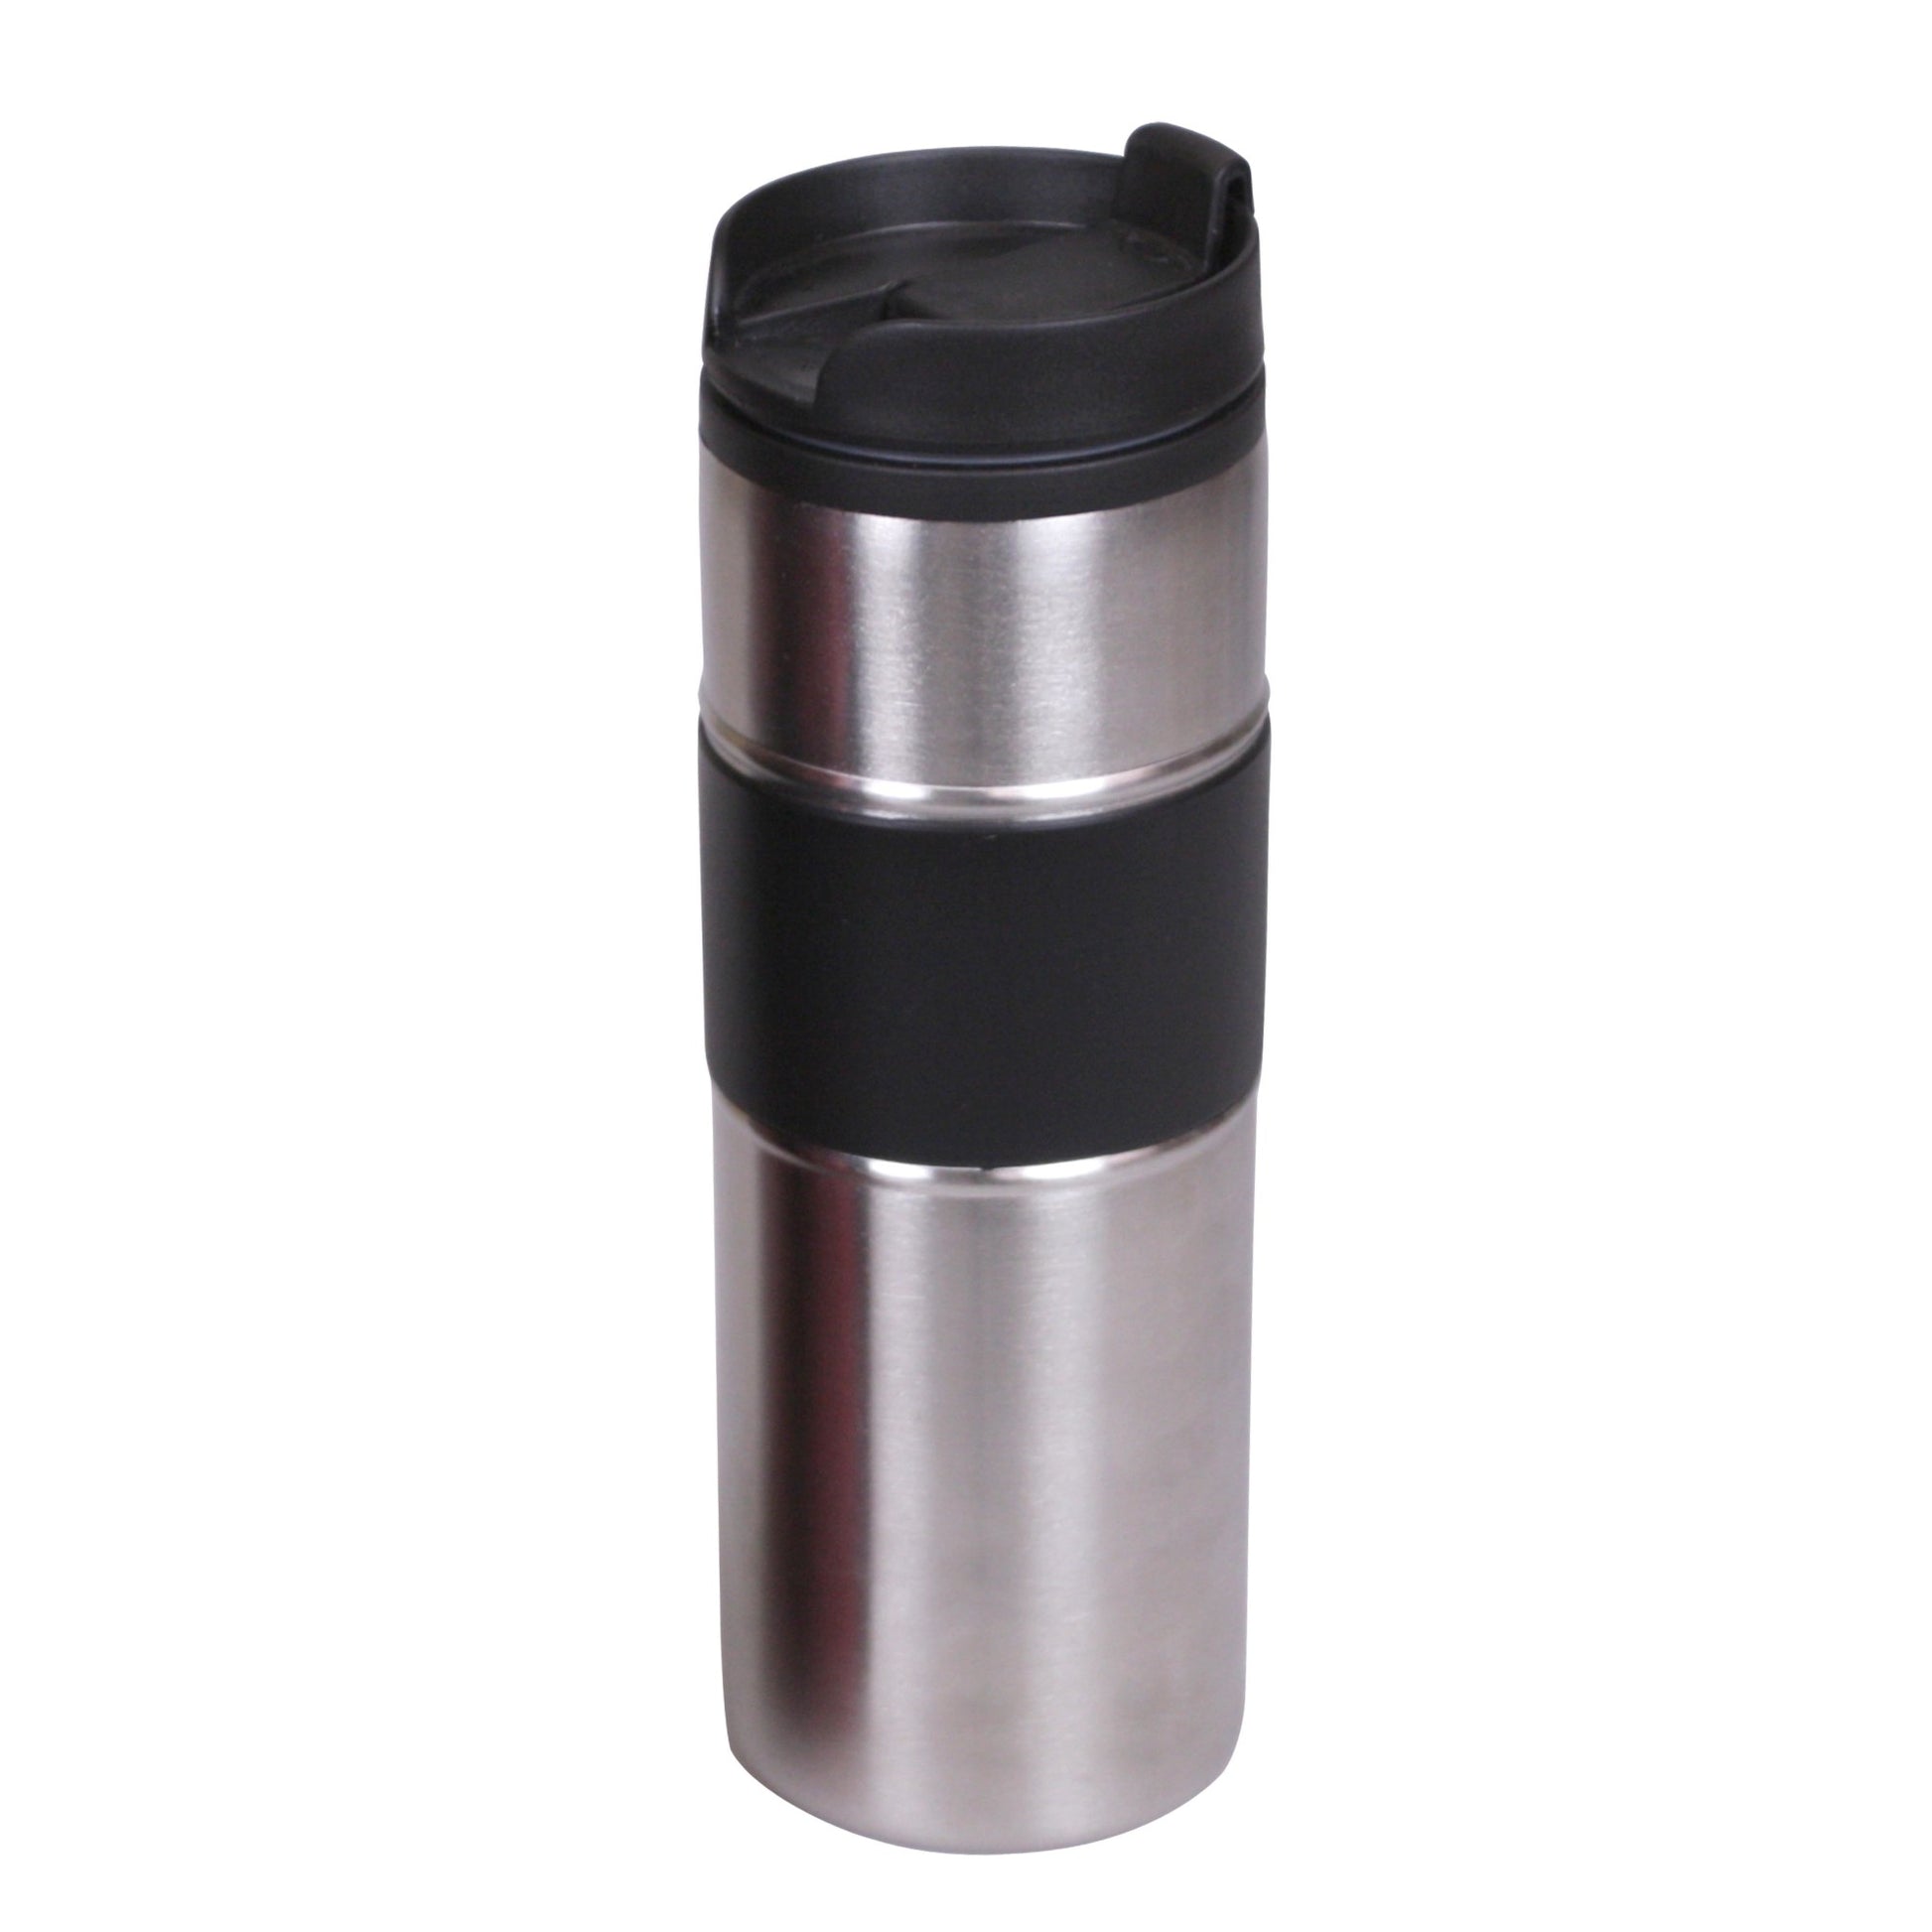 Home Basics Stainless Steel Travel Mug with Rubber Grip - Silver